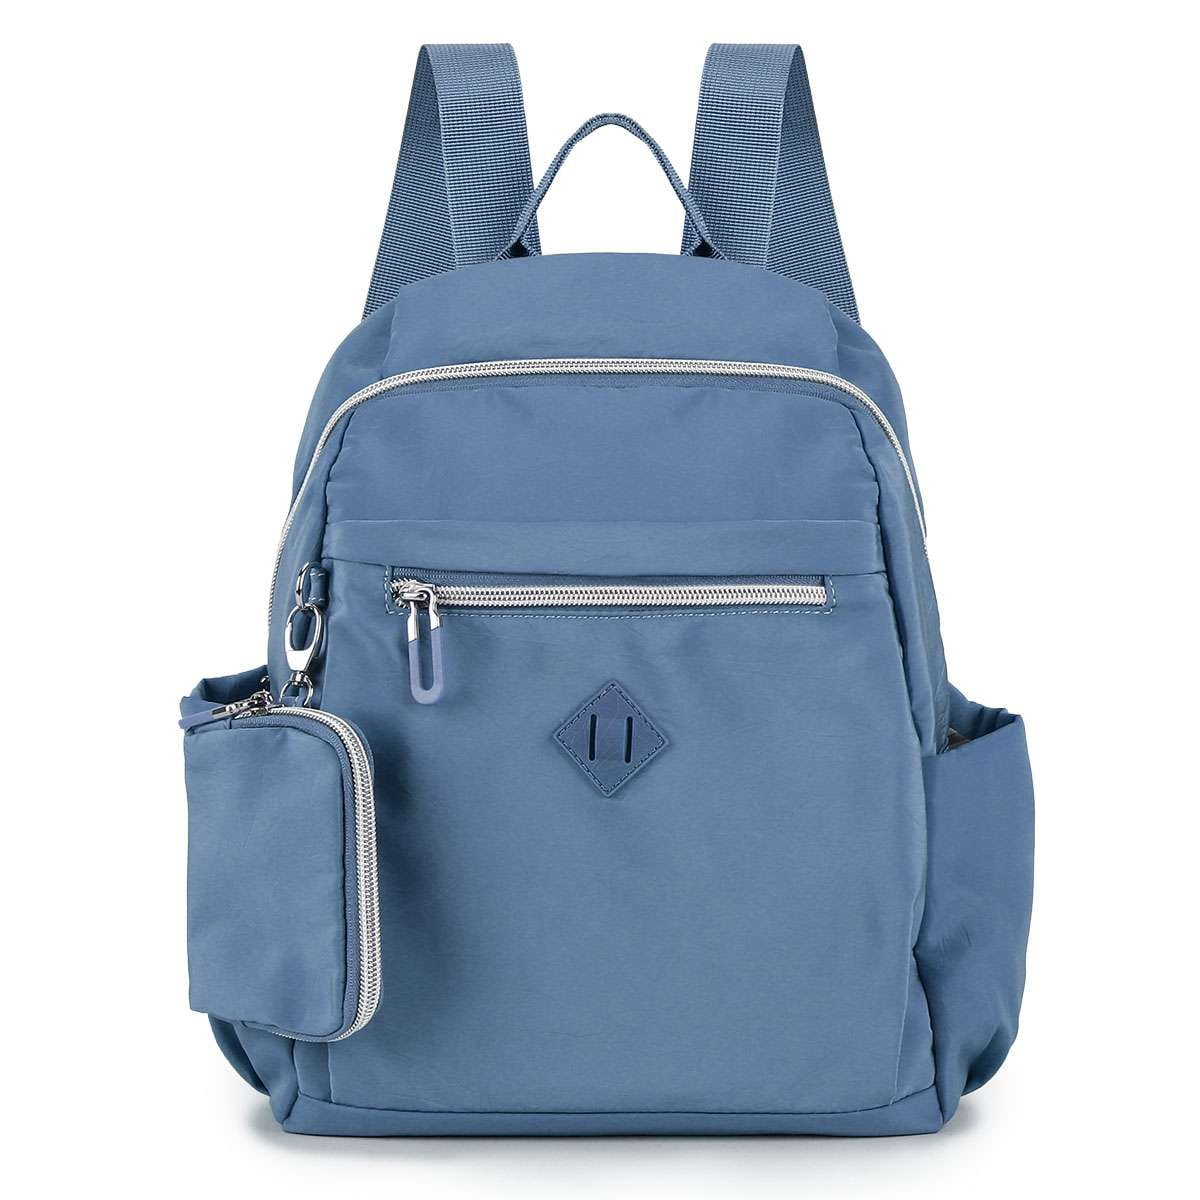 Spencer Waterproof Nylon Travel Backpack Women Casual Shoulder Bag Lightweight Small Daypack Purse Adult Kids School Hiking Camping Cycling Blue b23e268a 9ed2 4c87 88fe 86e7617f8631.f3661494f1b05a5bef16d4ae85374a48